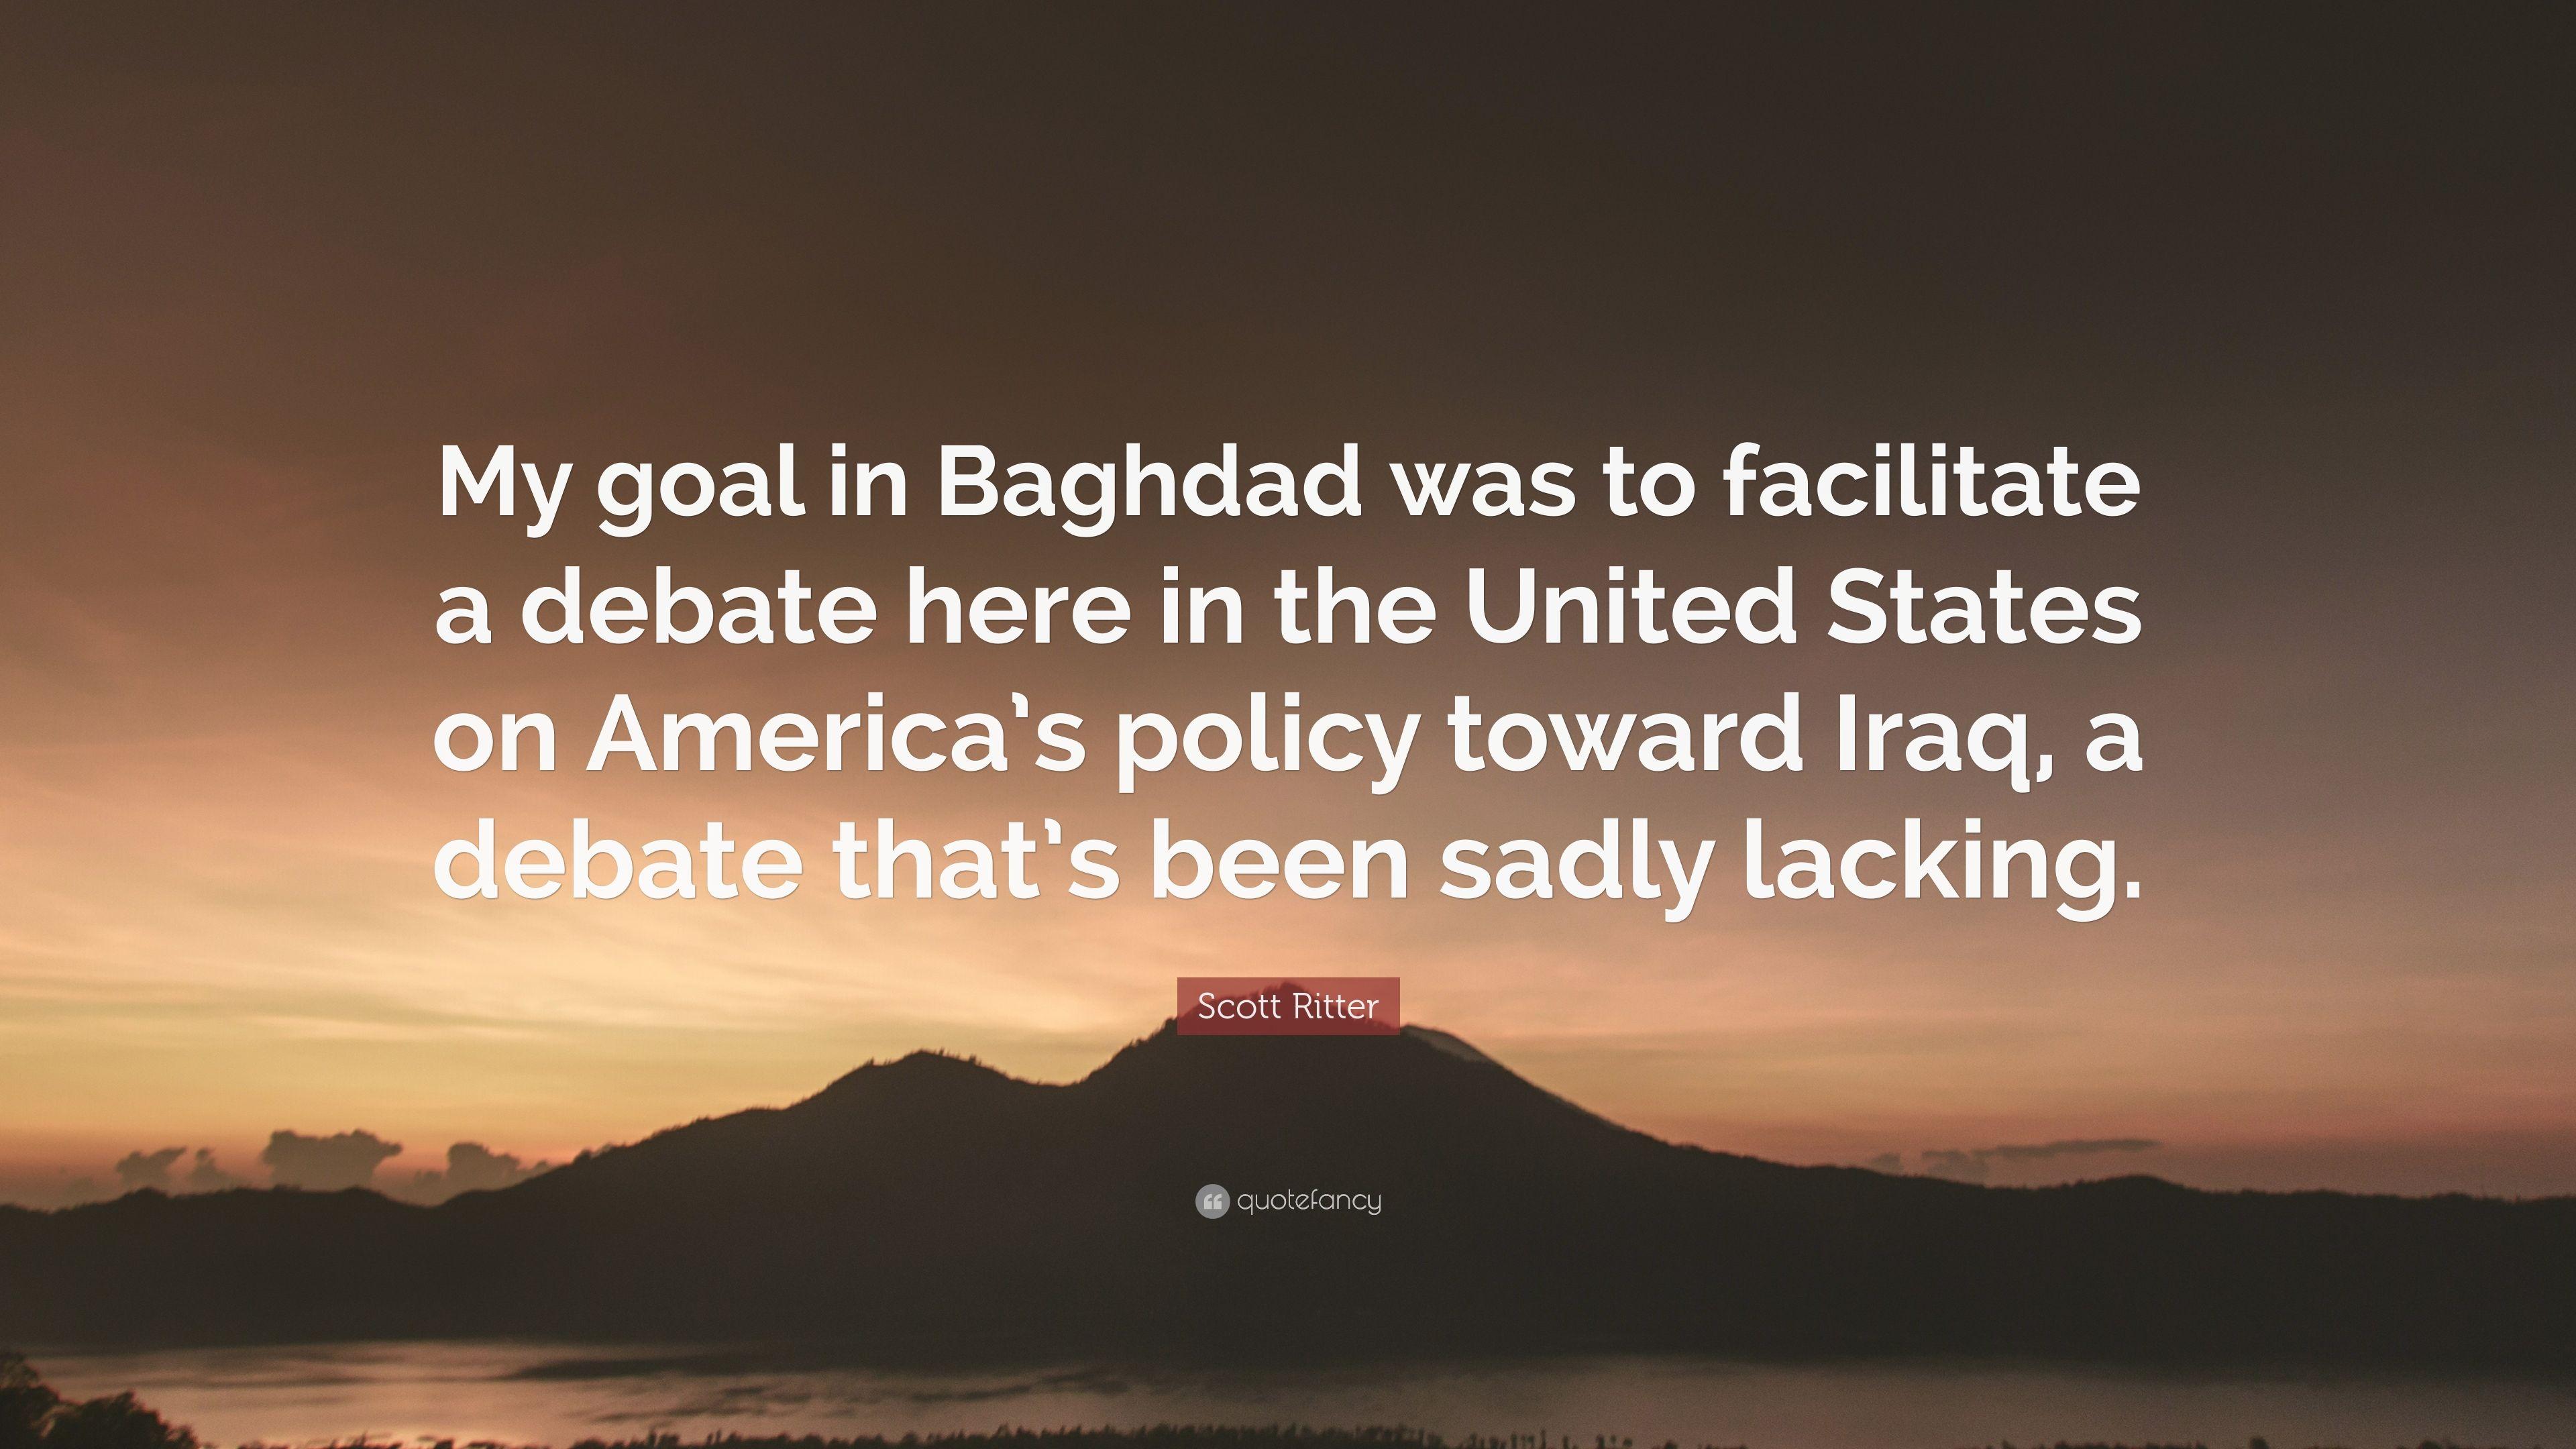 Scott Ritter Quote: “My goal in Baghdad was to facilitate a debate